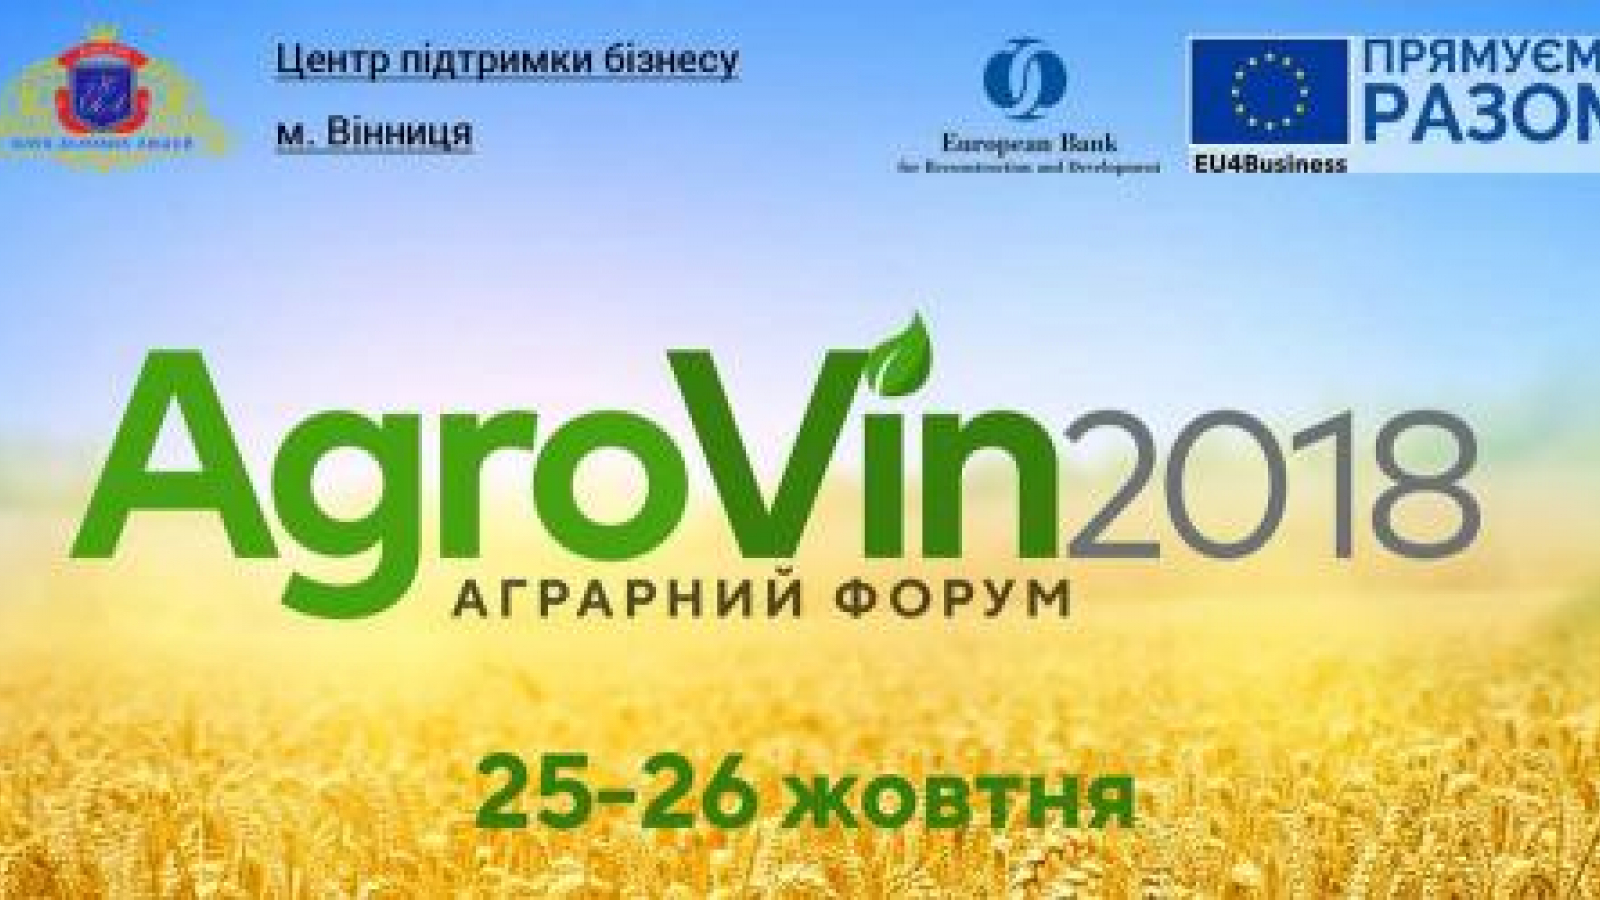 EU to support the biggest agricultural forum in central Ukraine